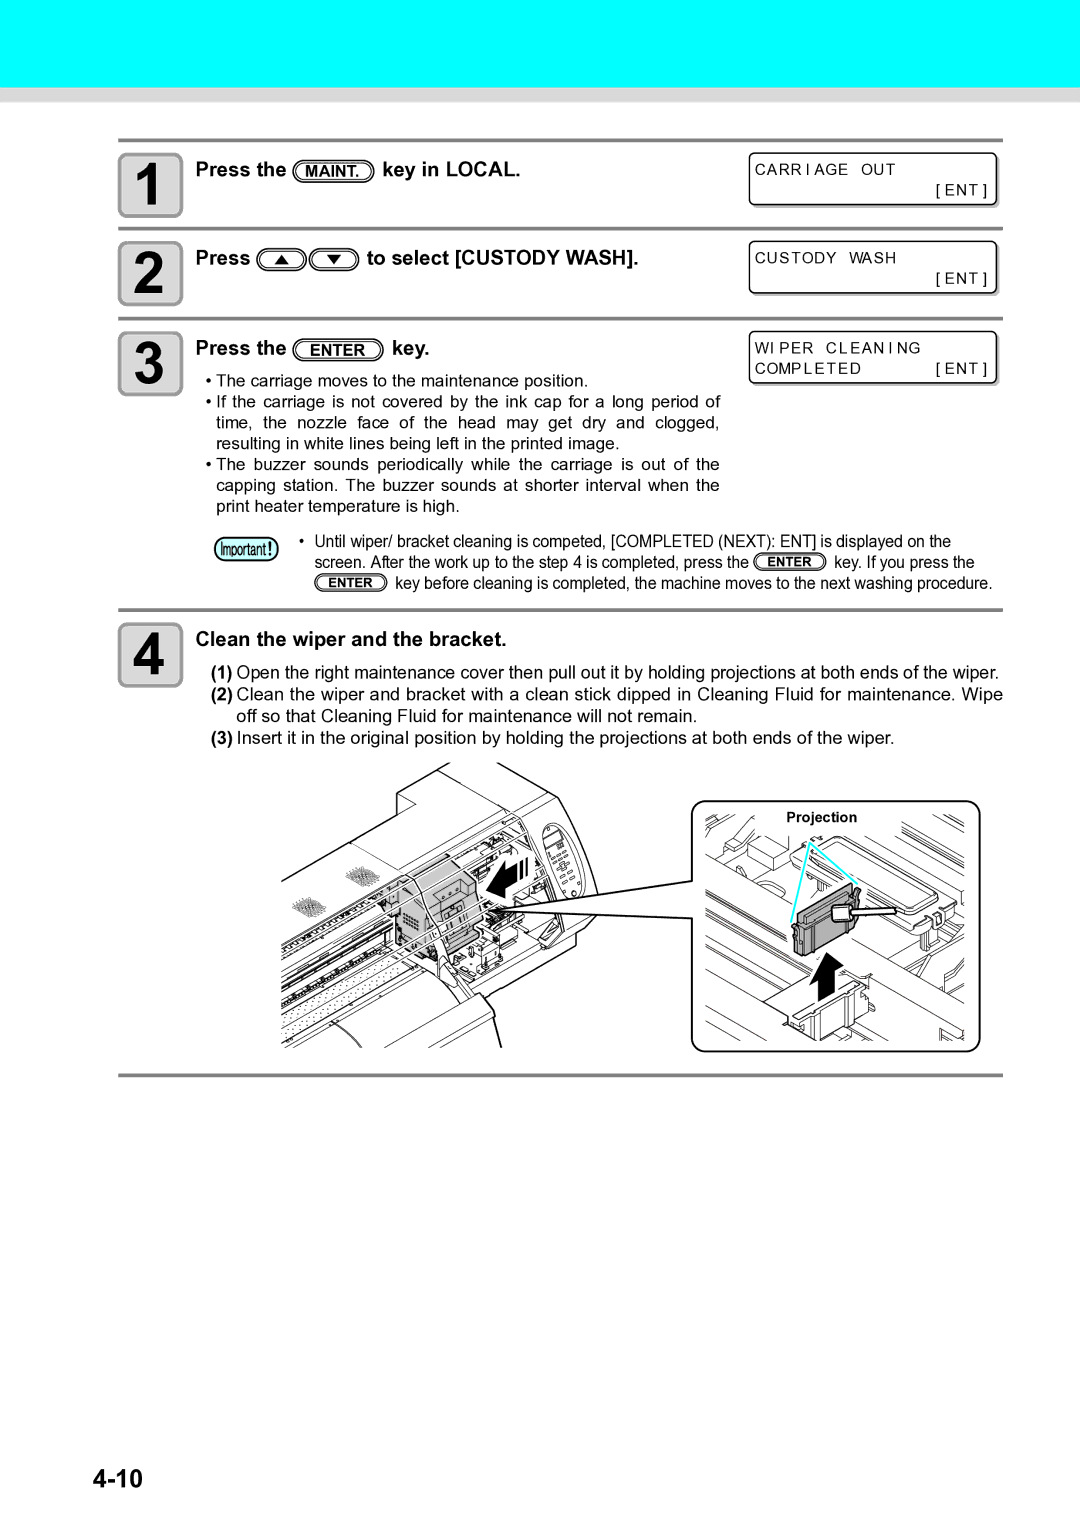 Ricoh L4130, L4160 operation manual Press To select Custody Wash, Clean the wiper and the bracket 